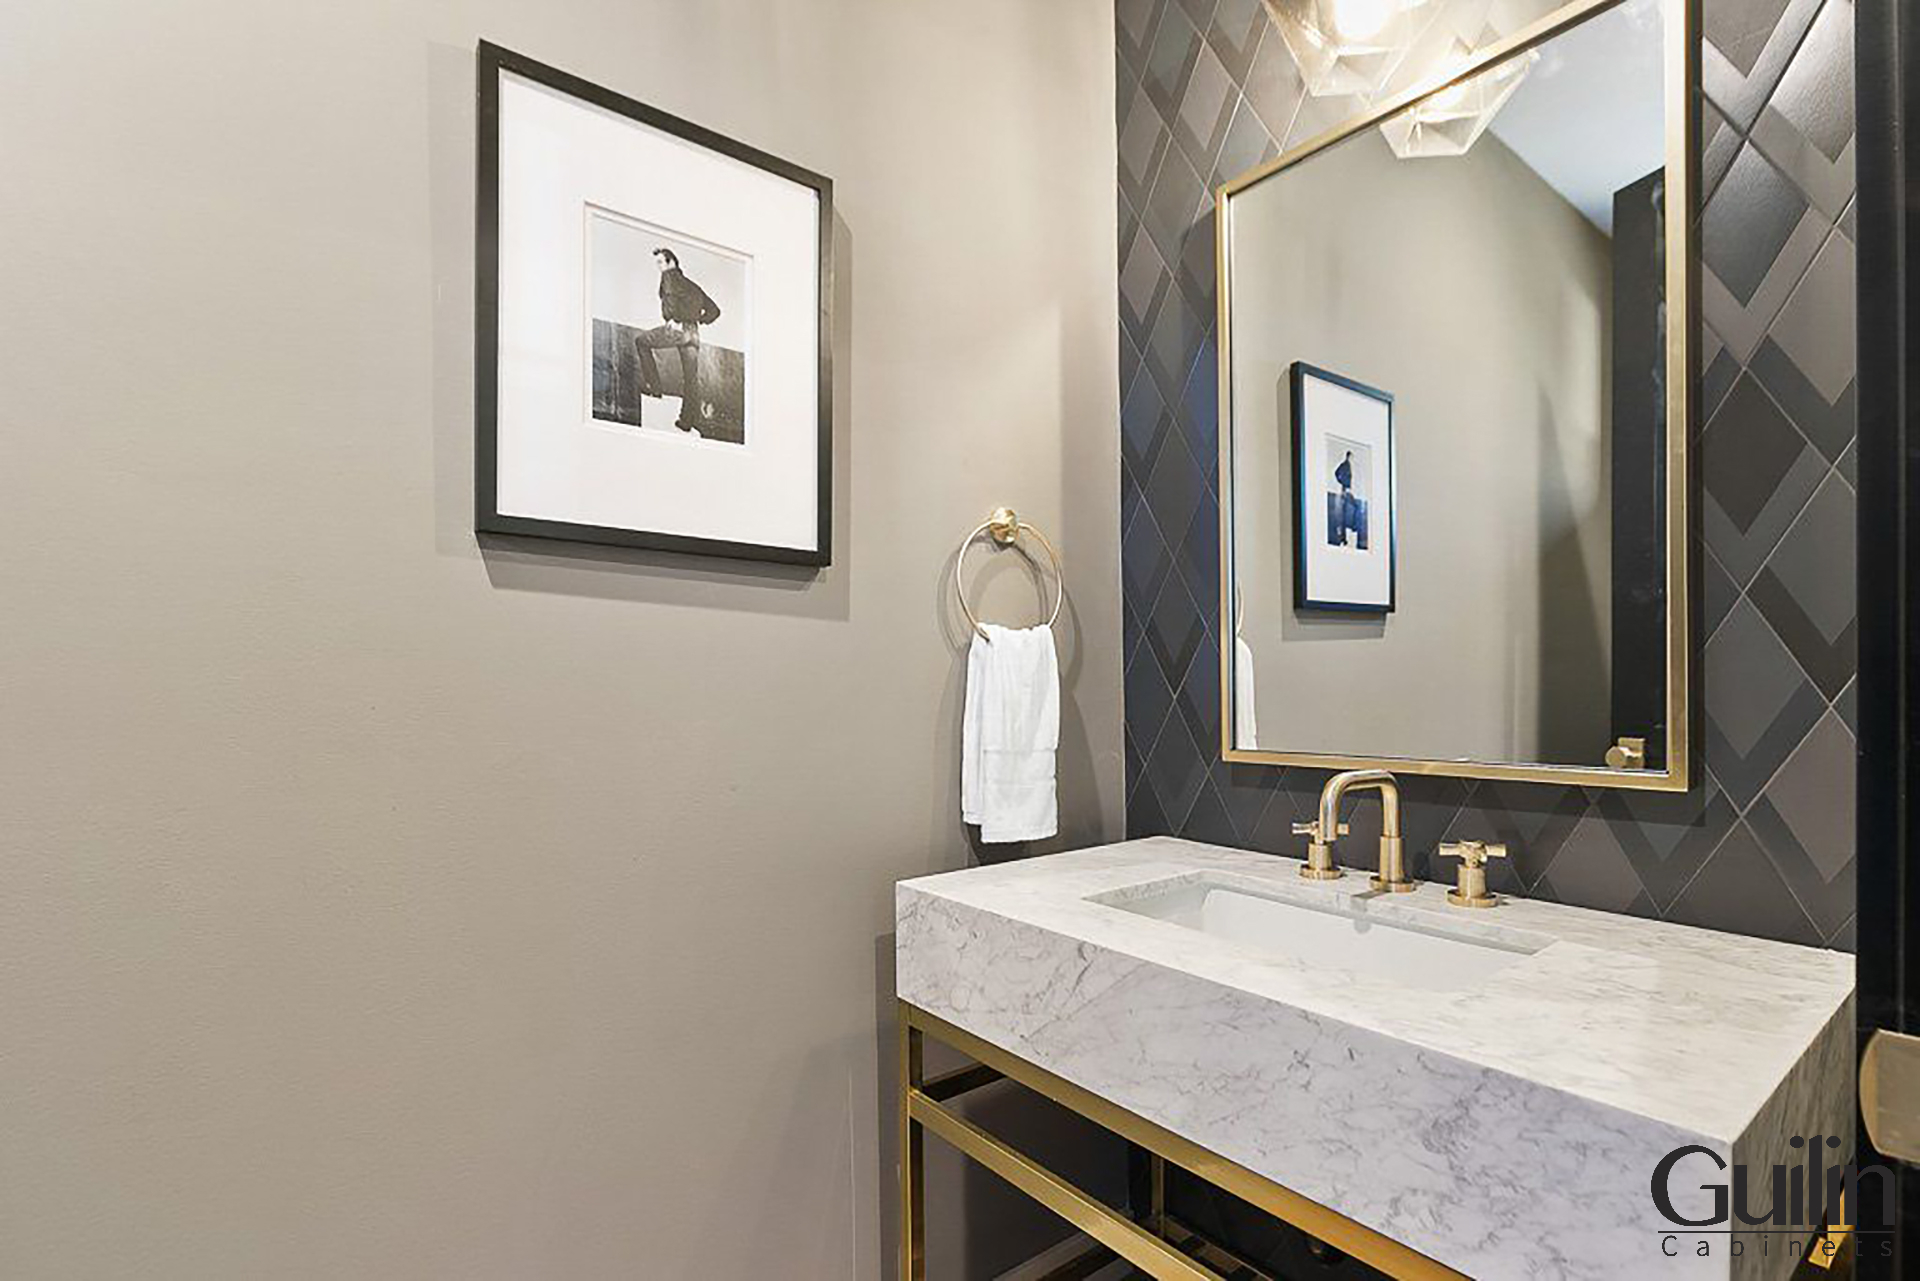 Modern theme: greys, white tones colors - The Bathroom Project by Guilin Cabinets